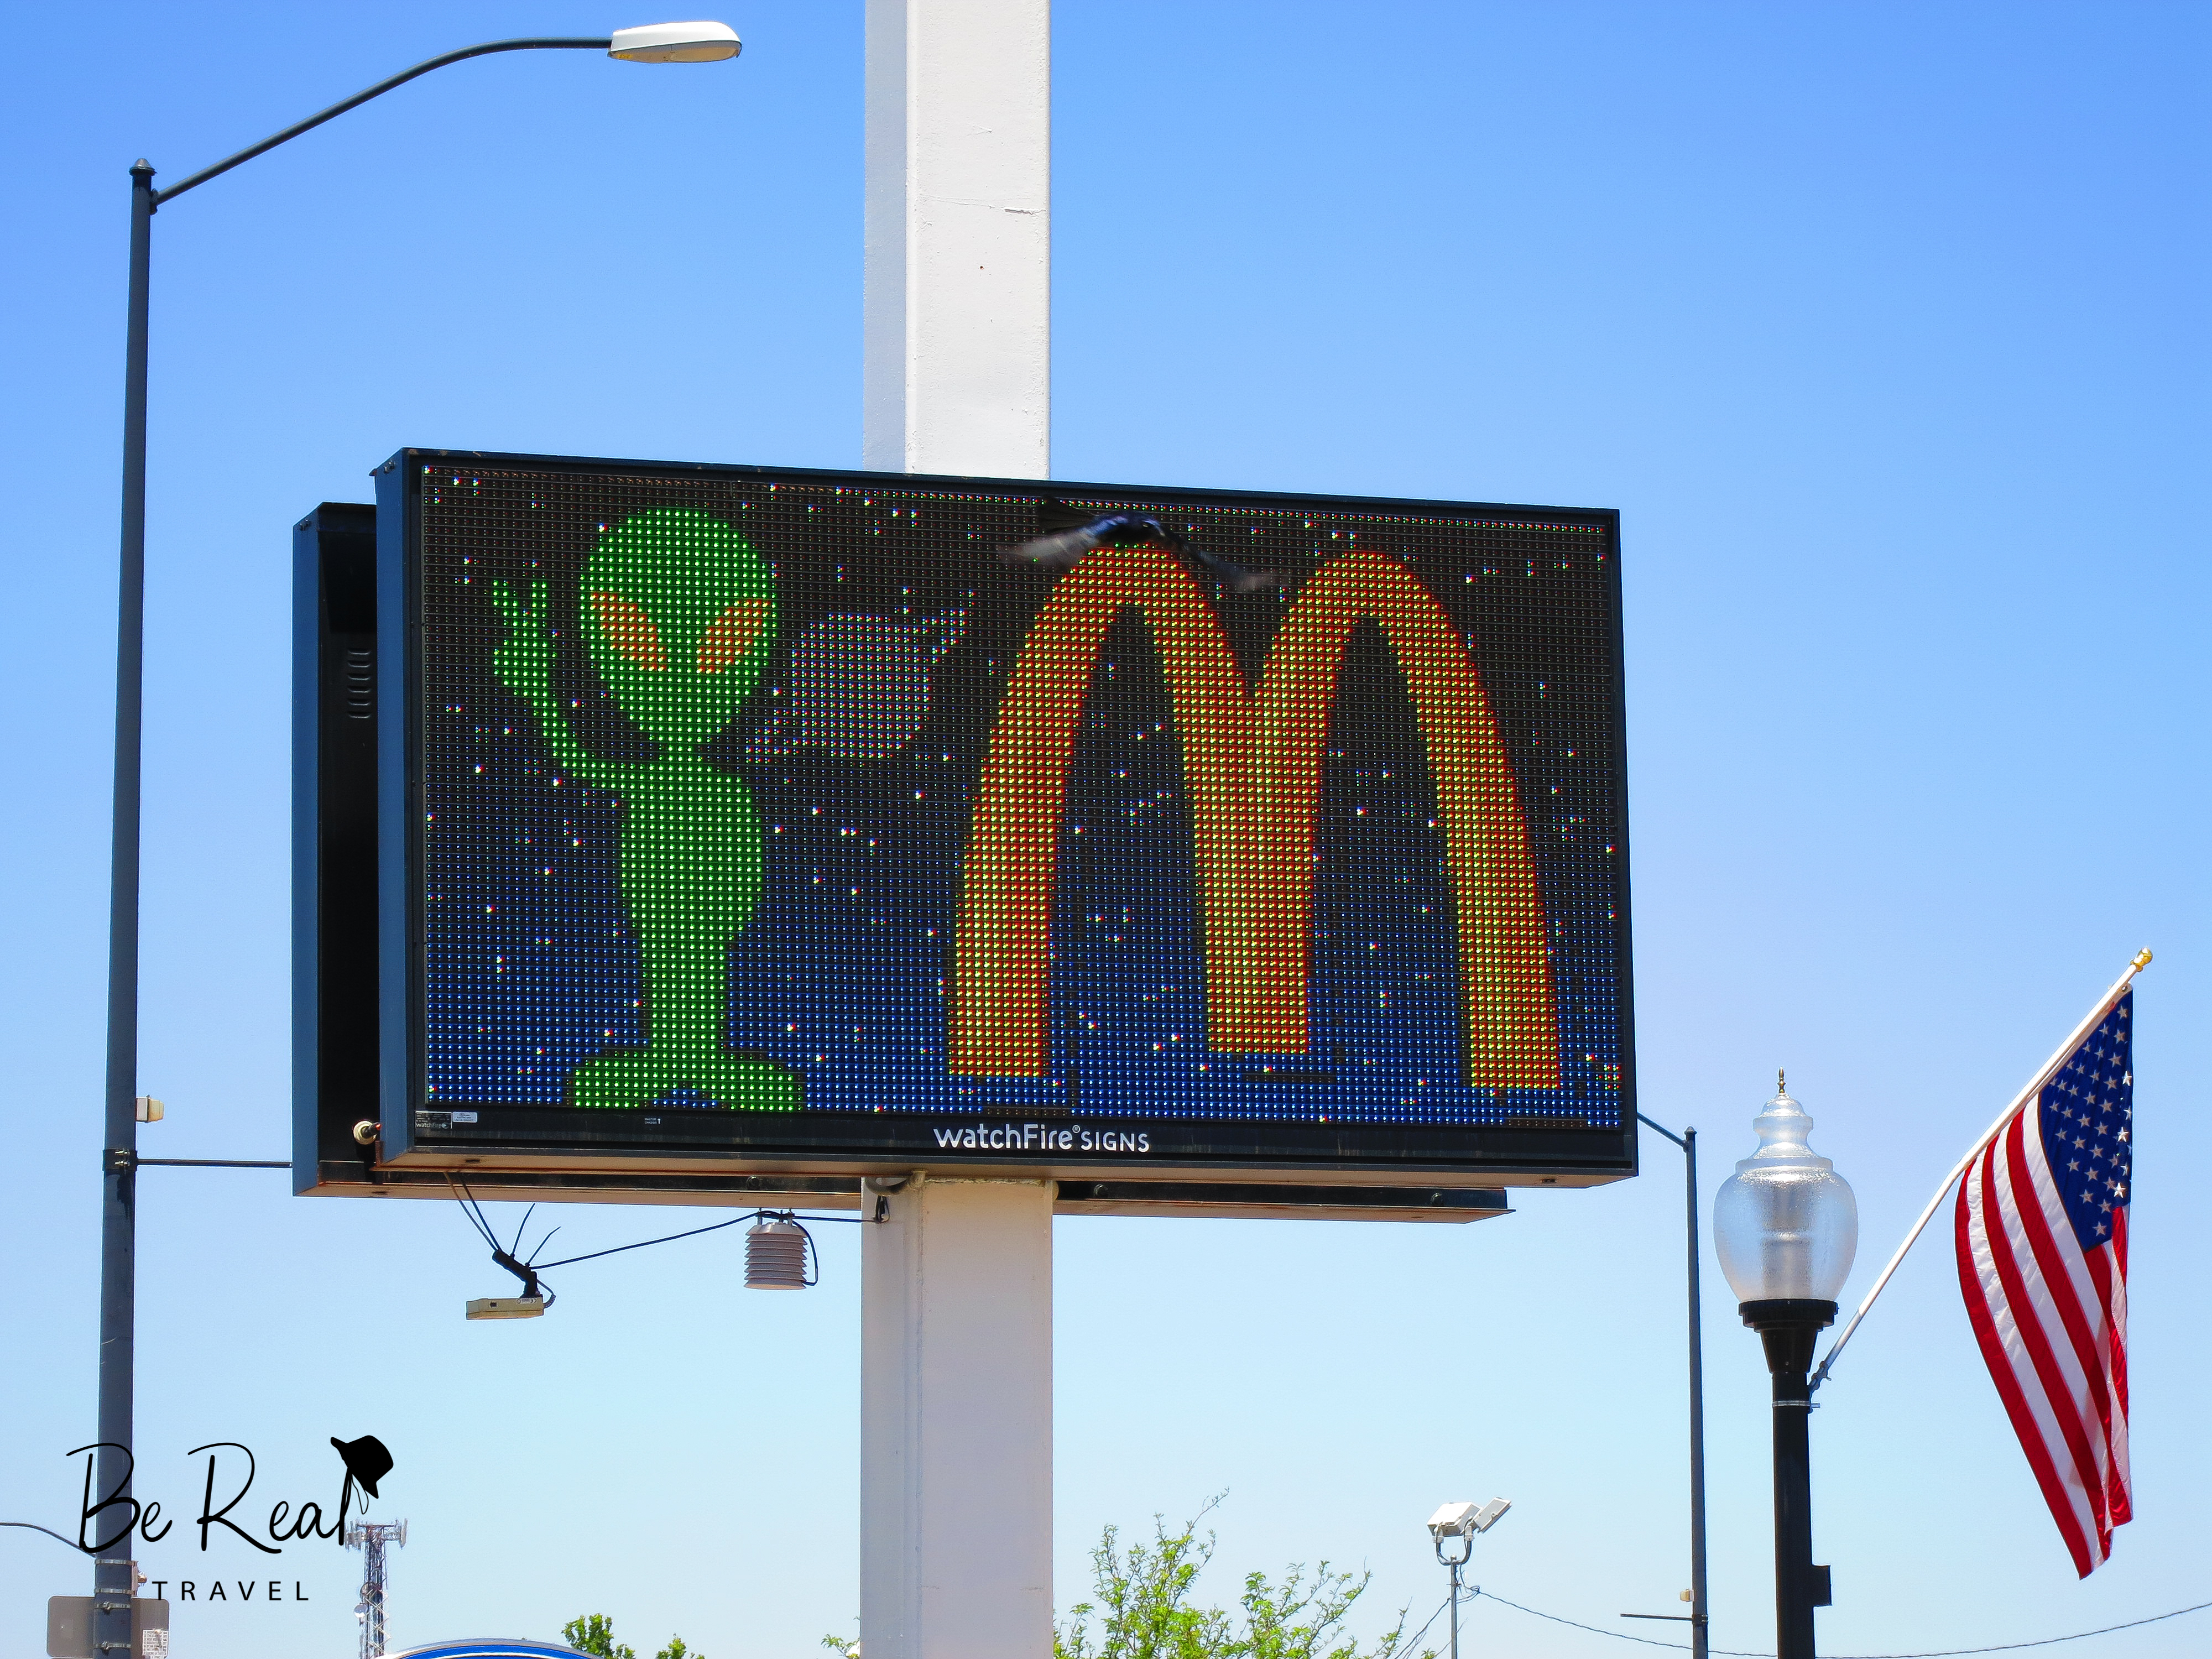 An alien gives the peace sign on a McDonald's billboard in Roswell, New Mexico